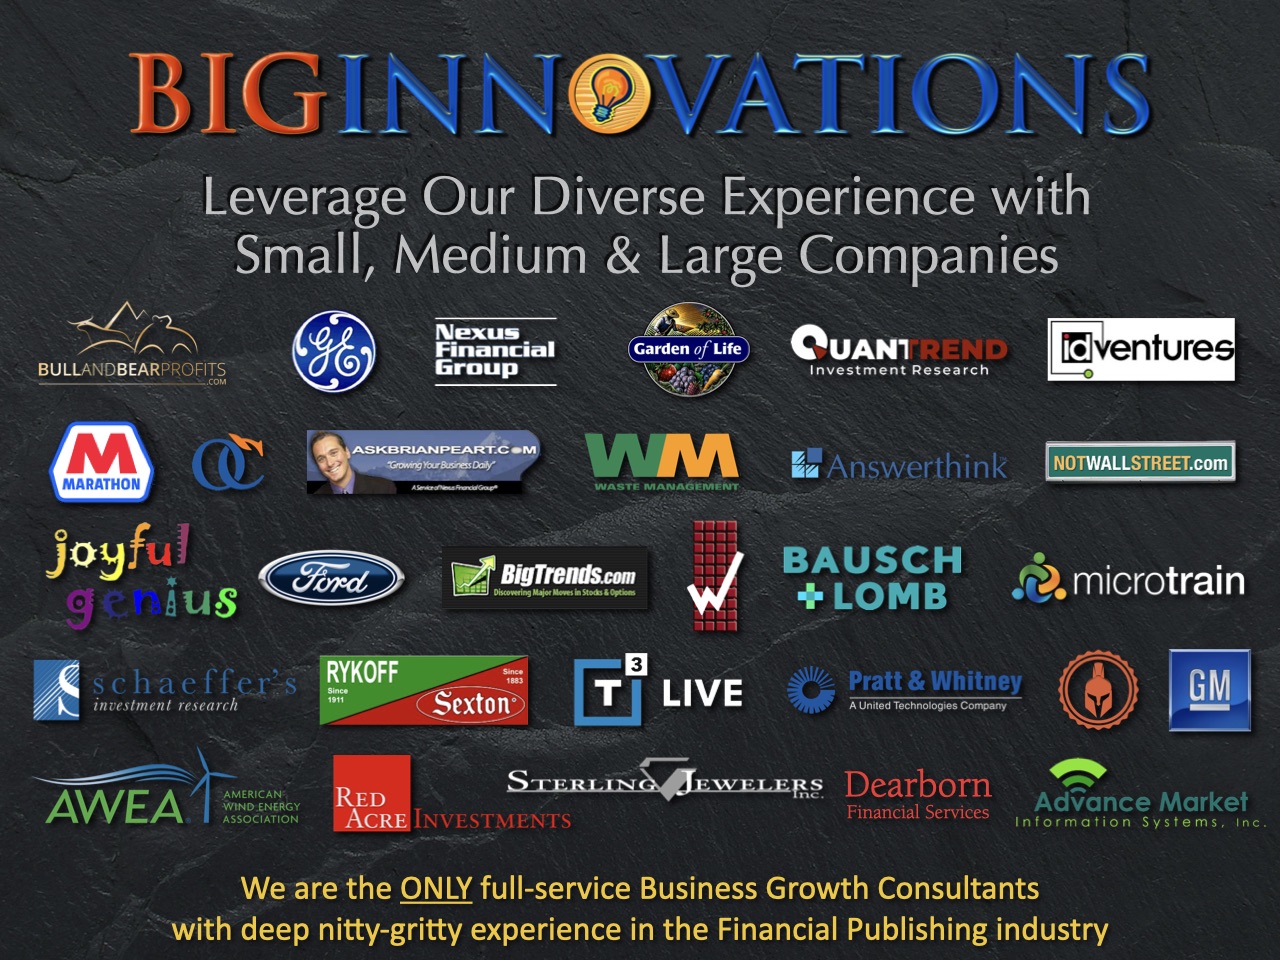 Leverage our diverse experience with very successful financial publishing and related companies